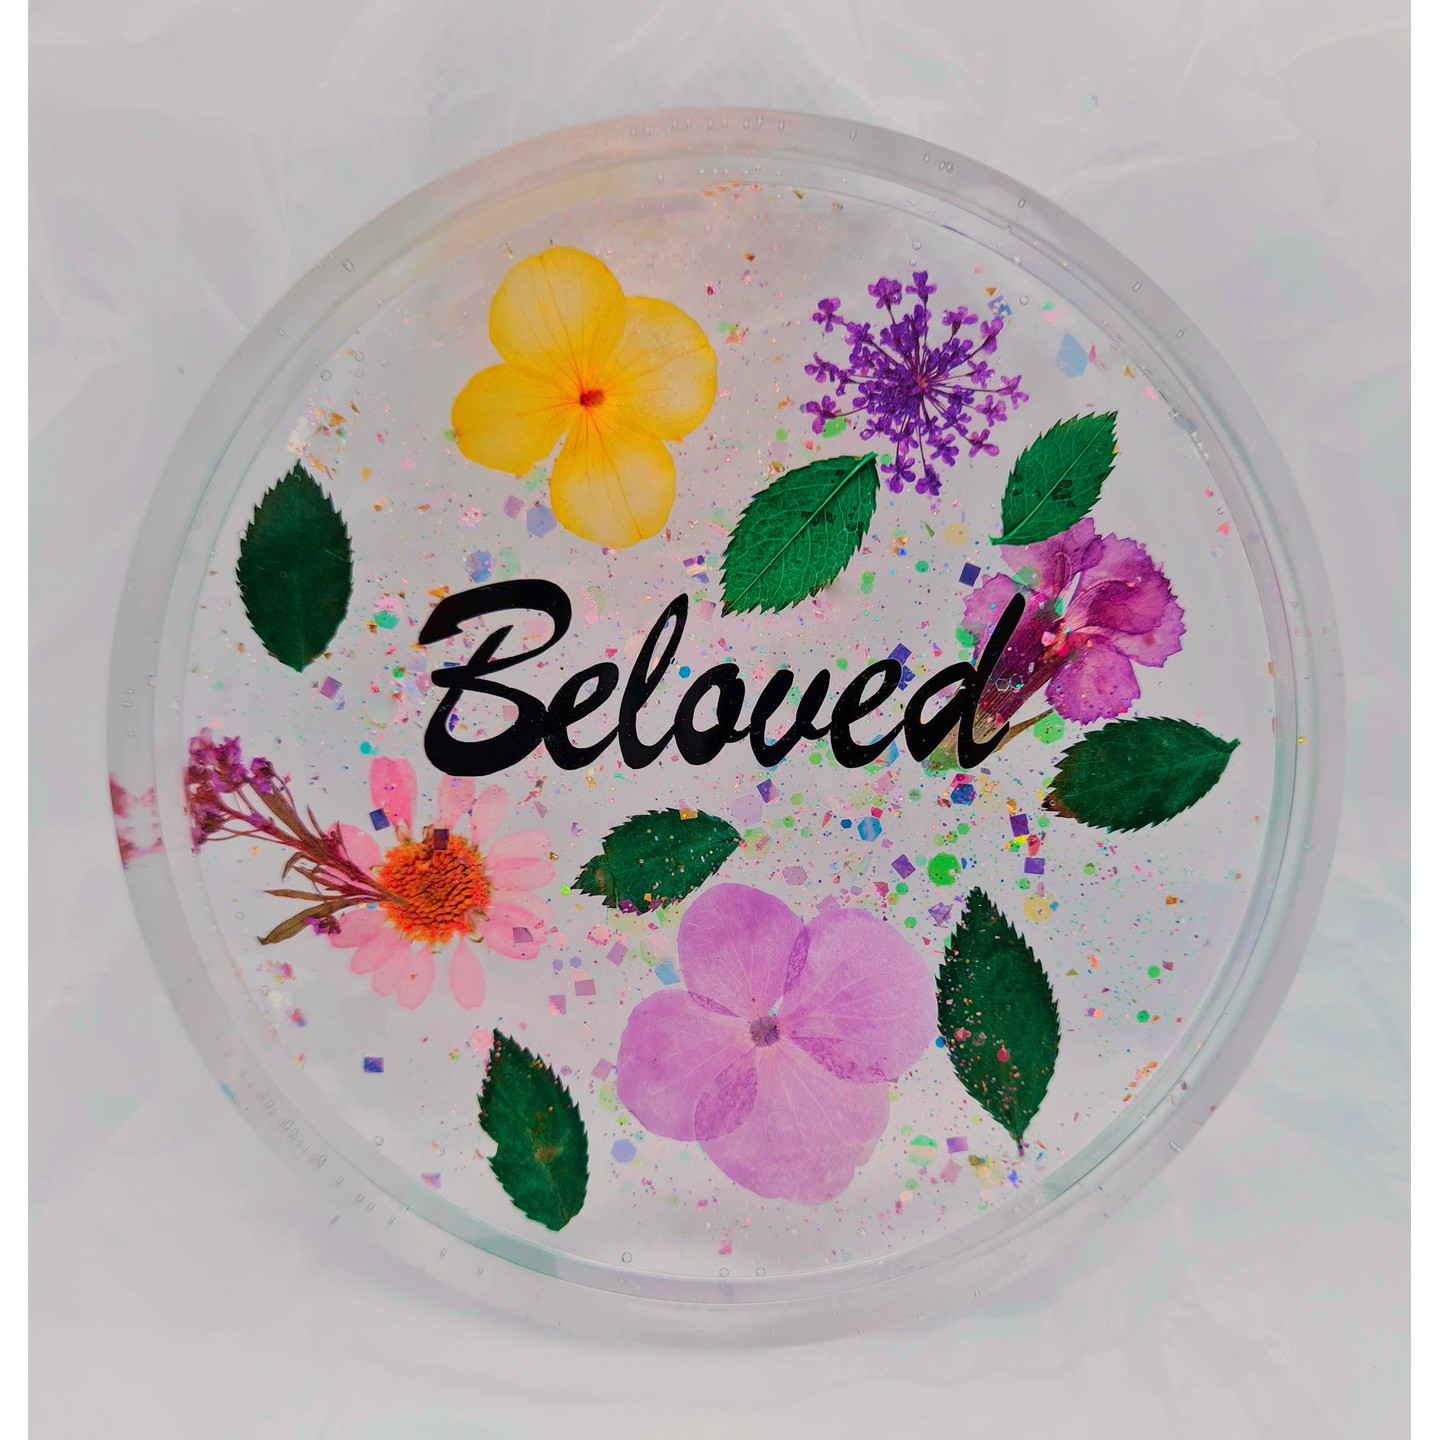 Beloved   Real Pressed Flowers & Leaves Resin Coaster with an inspirational word Handmade